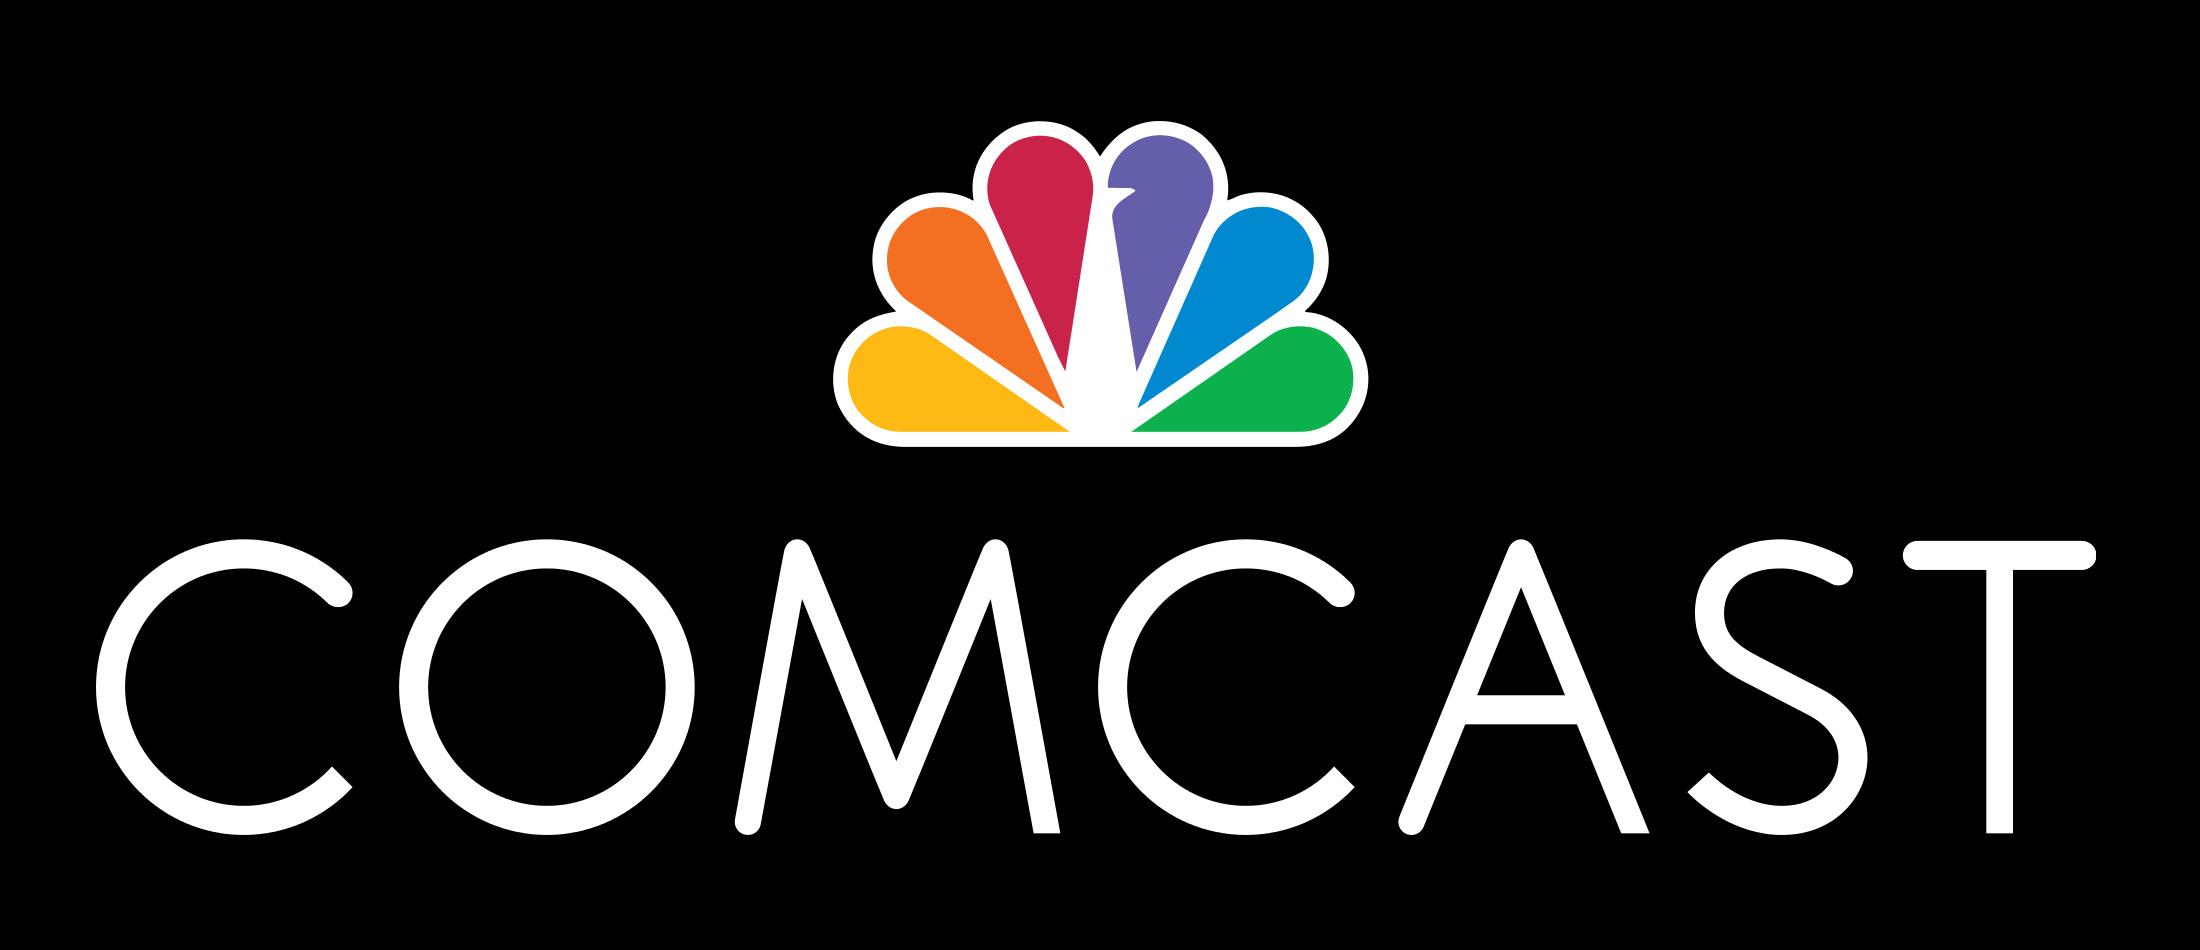 Comcast Logo - Comcast Logo, Comcast Symbol Meaning, History and Evolution